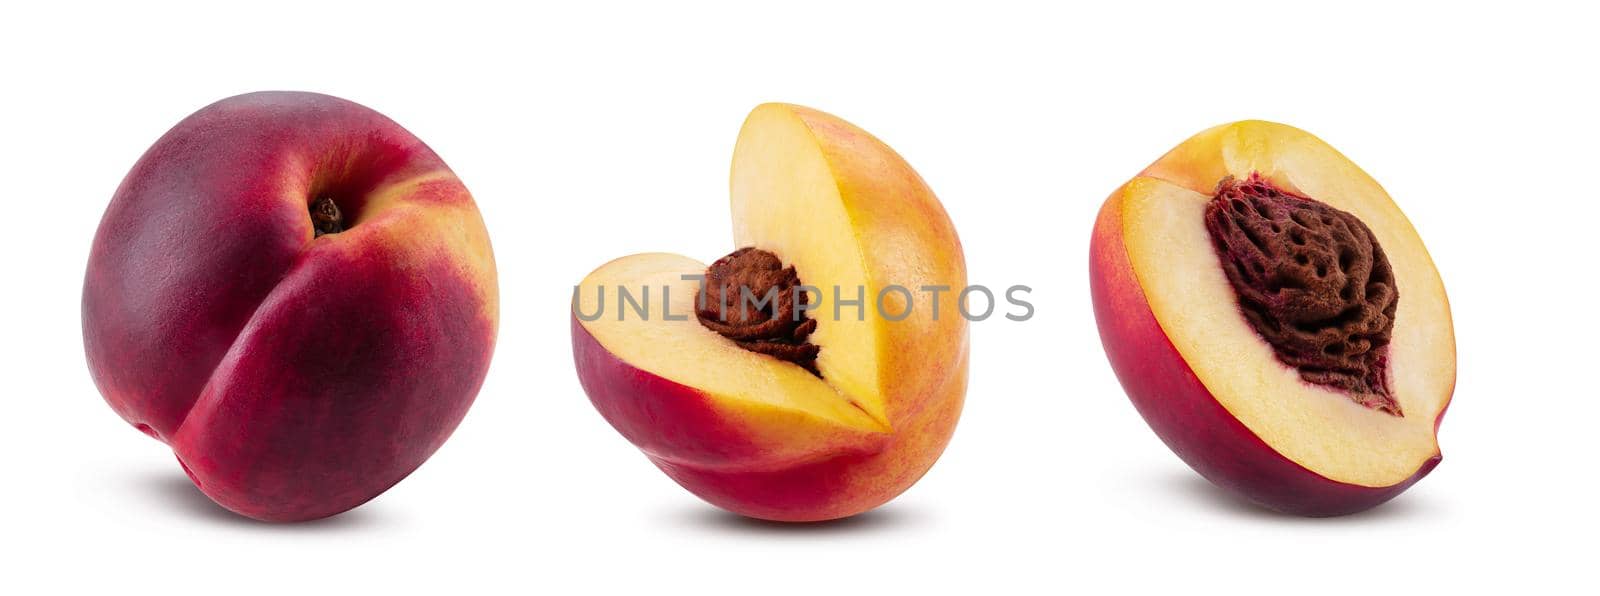 Smooth-skinned whole nectarine and two cutted out with kernels isolated on white background with copy space for text or images. Close-up shot. by nazarovsergey